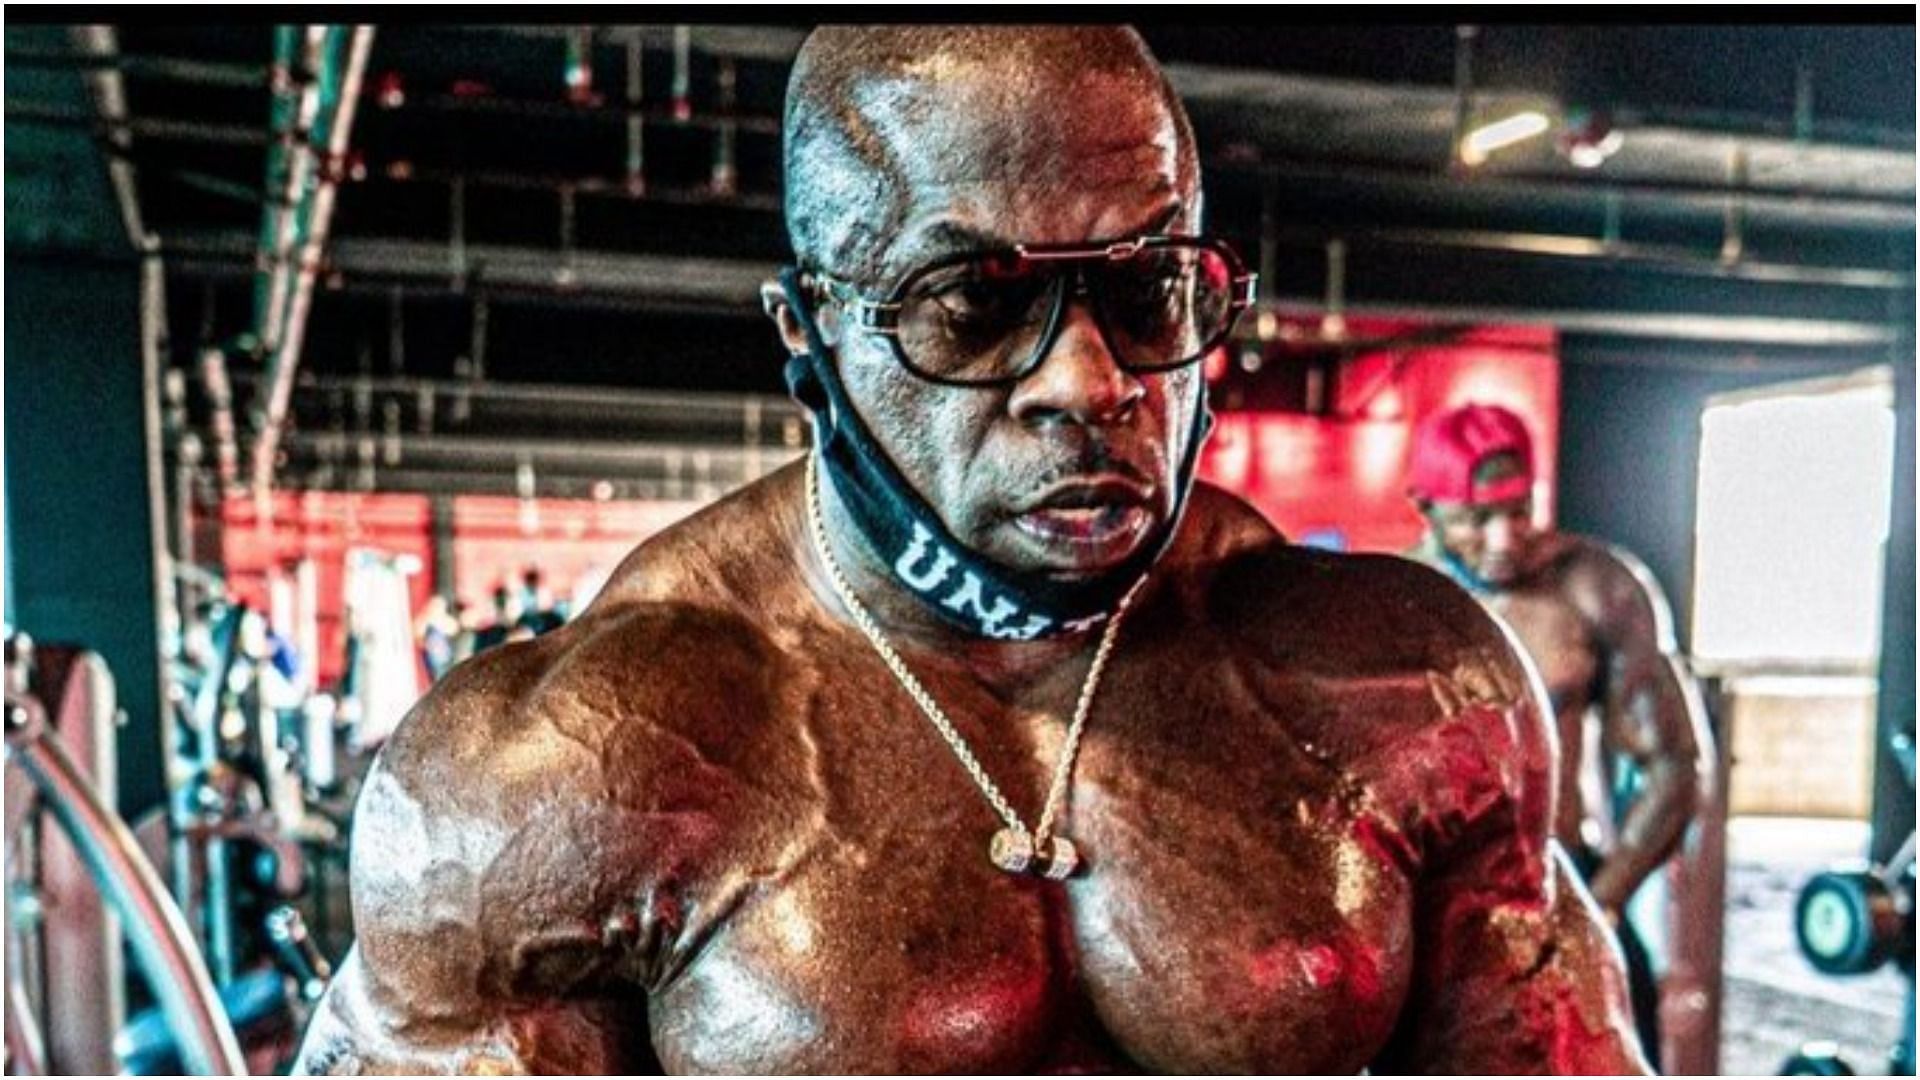 Kali Muscle was recently hospitalized following a heart attack (Image via Peter37570912/Twitter)